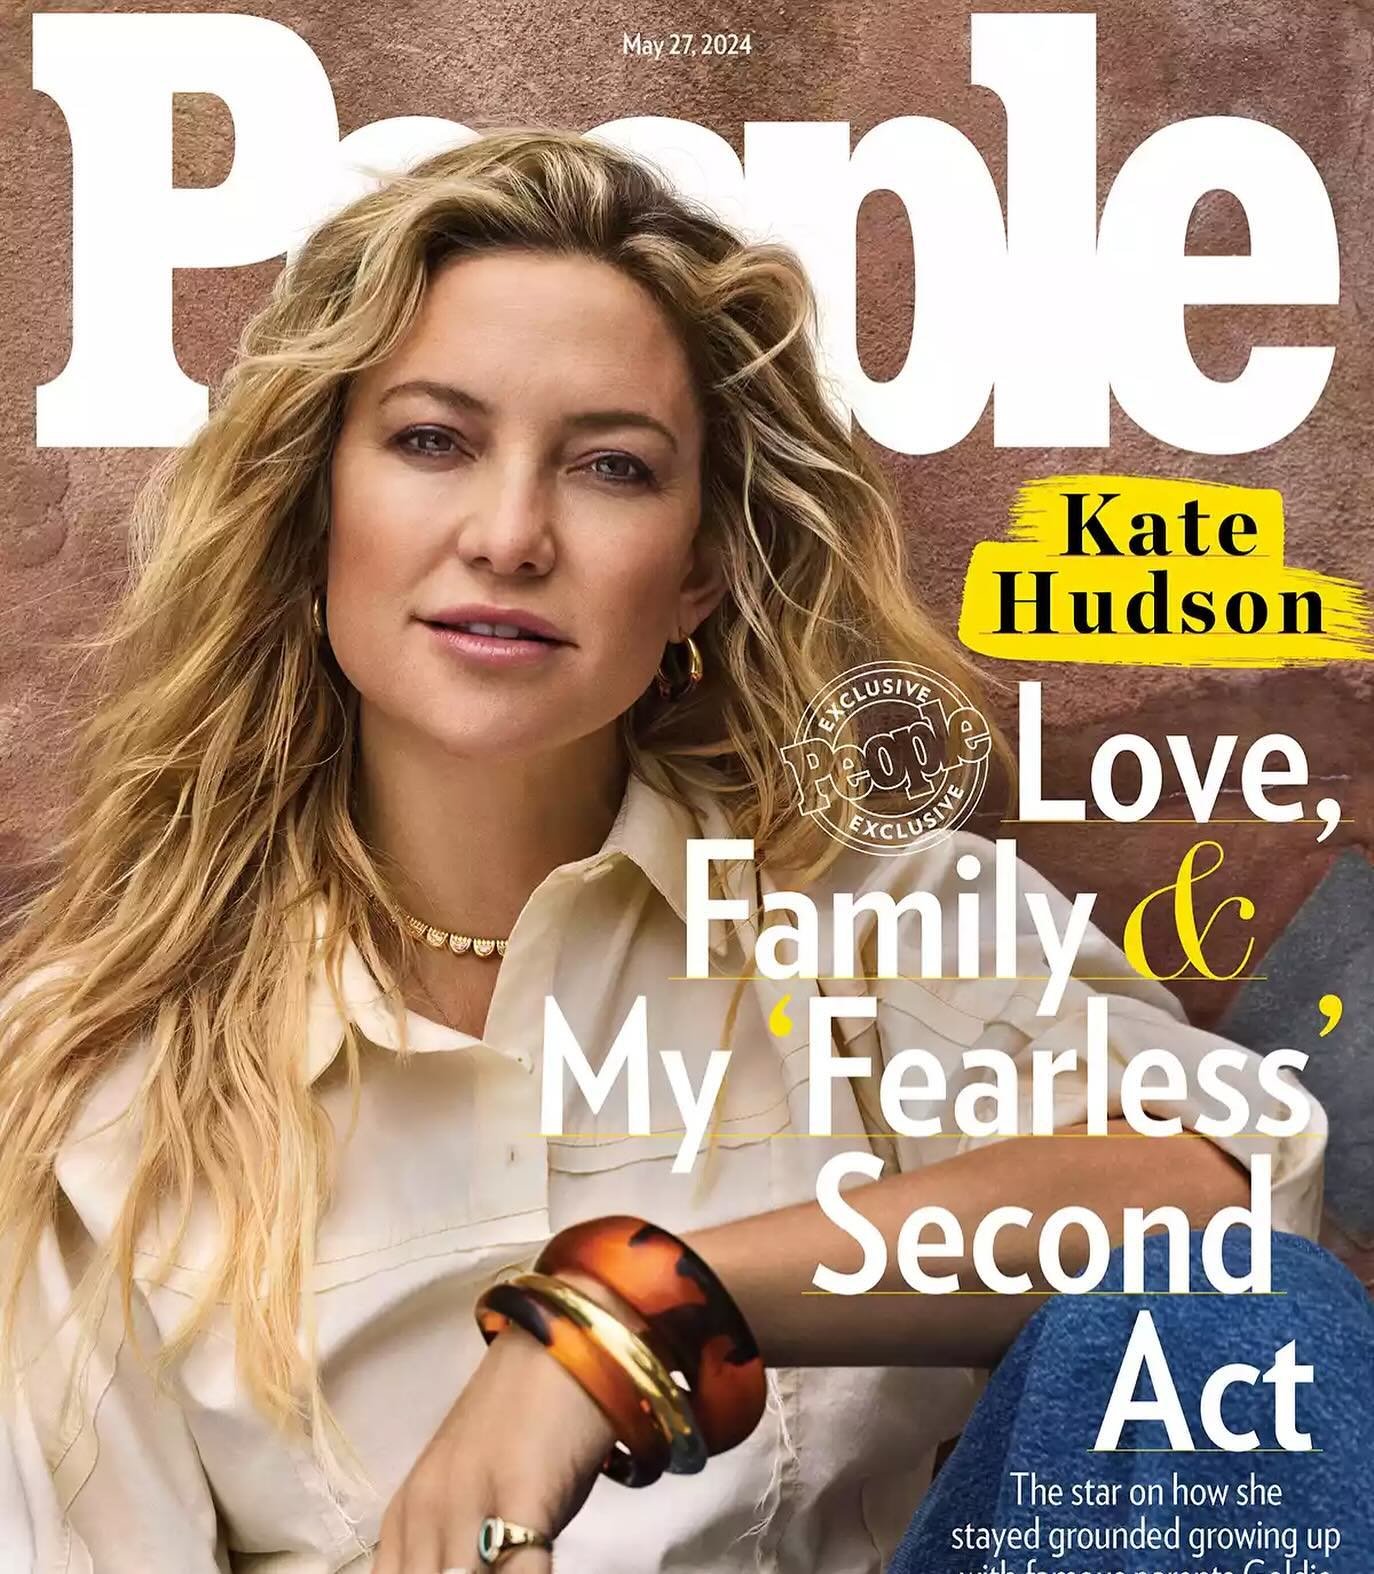 Kate. @katehudson on the #cover of @people wearing @thisisstateproperty @type_jewelry #finejewelry #jewelry #yayapublicity #katehudson #editorial @marc_eram